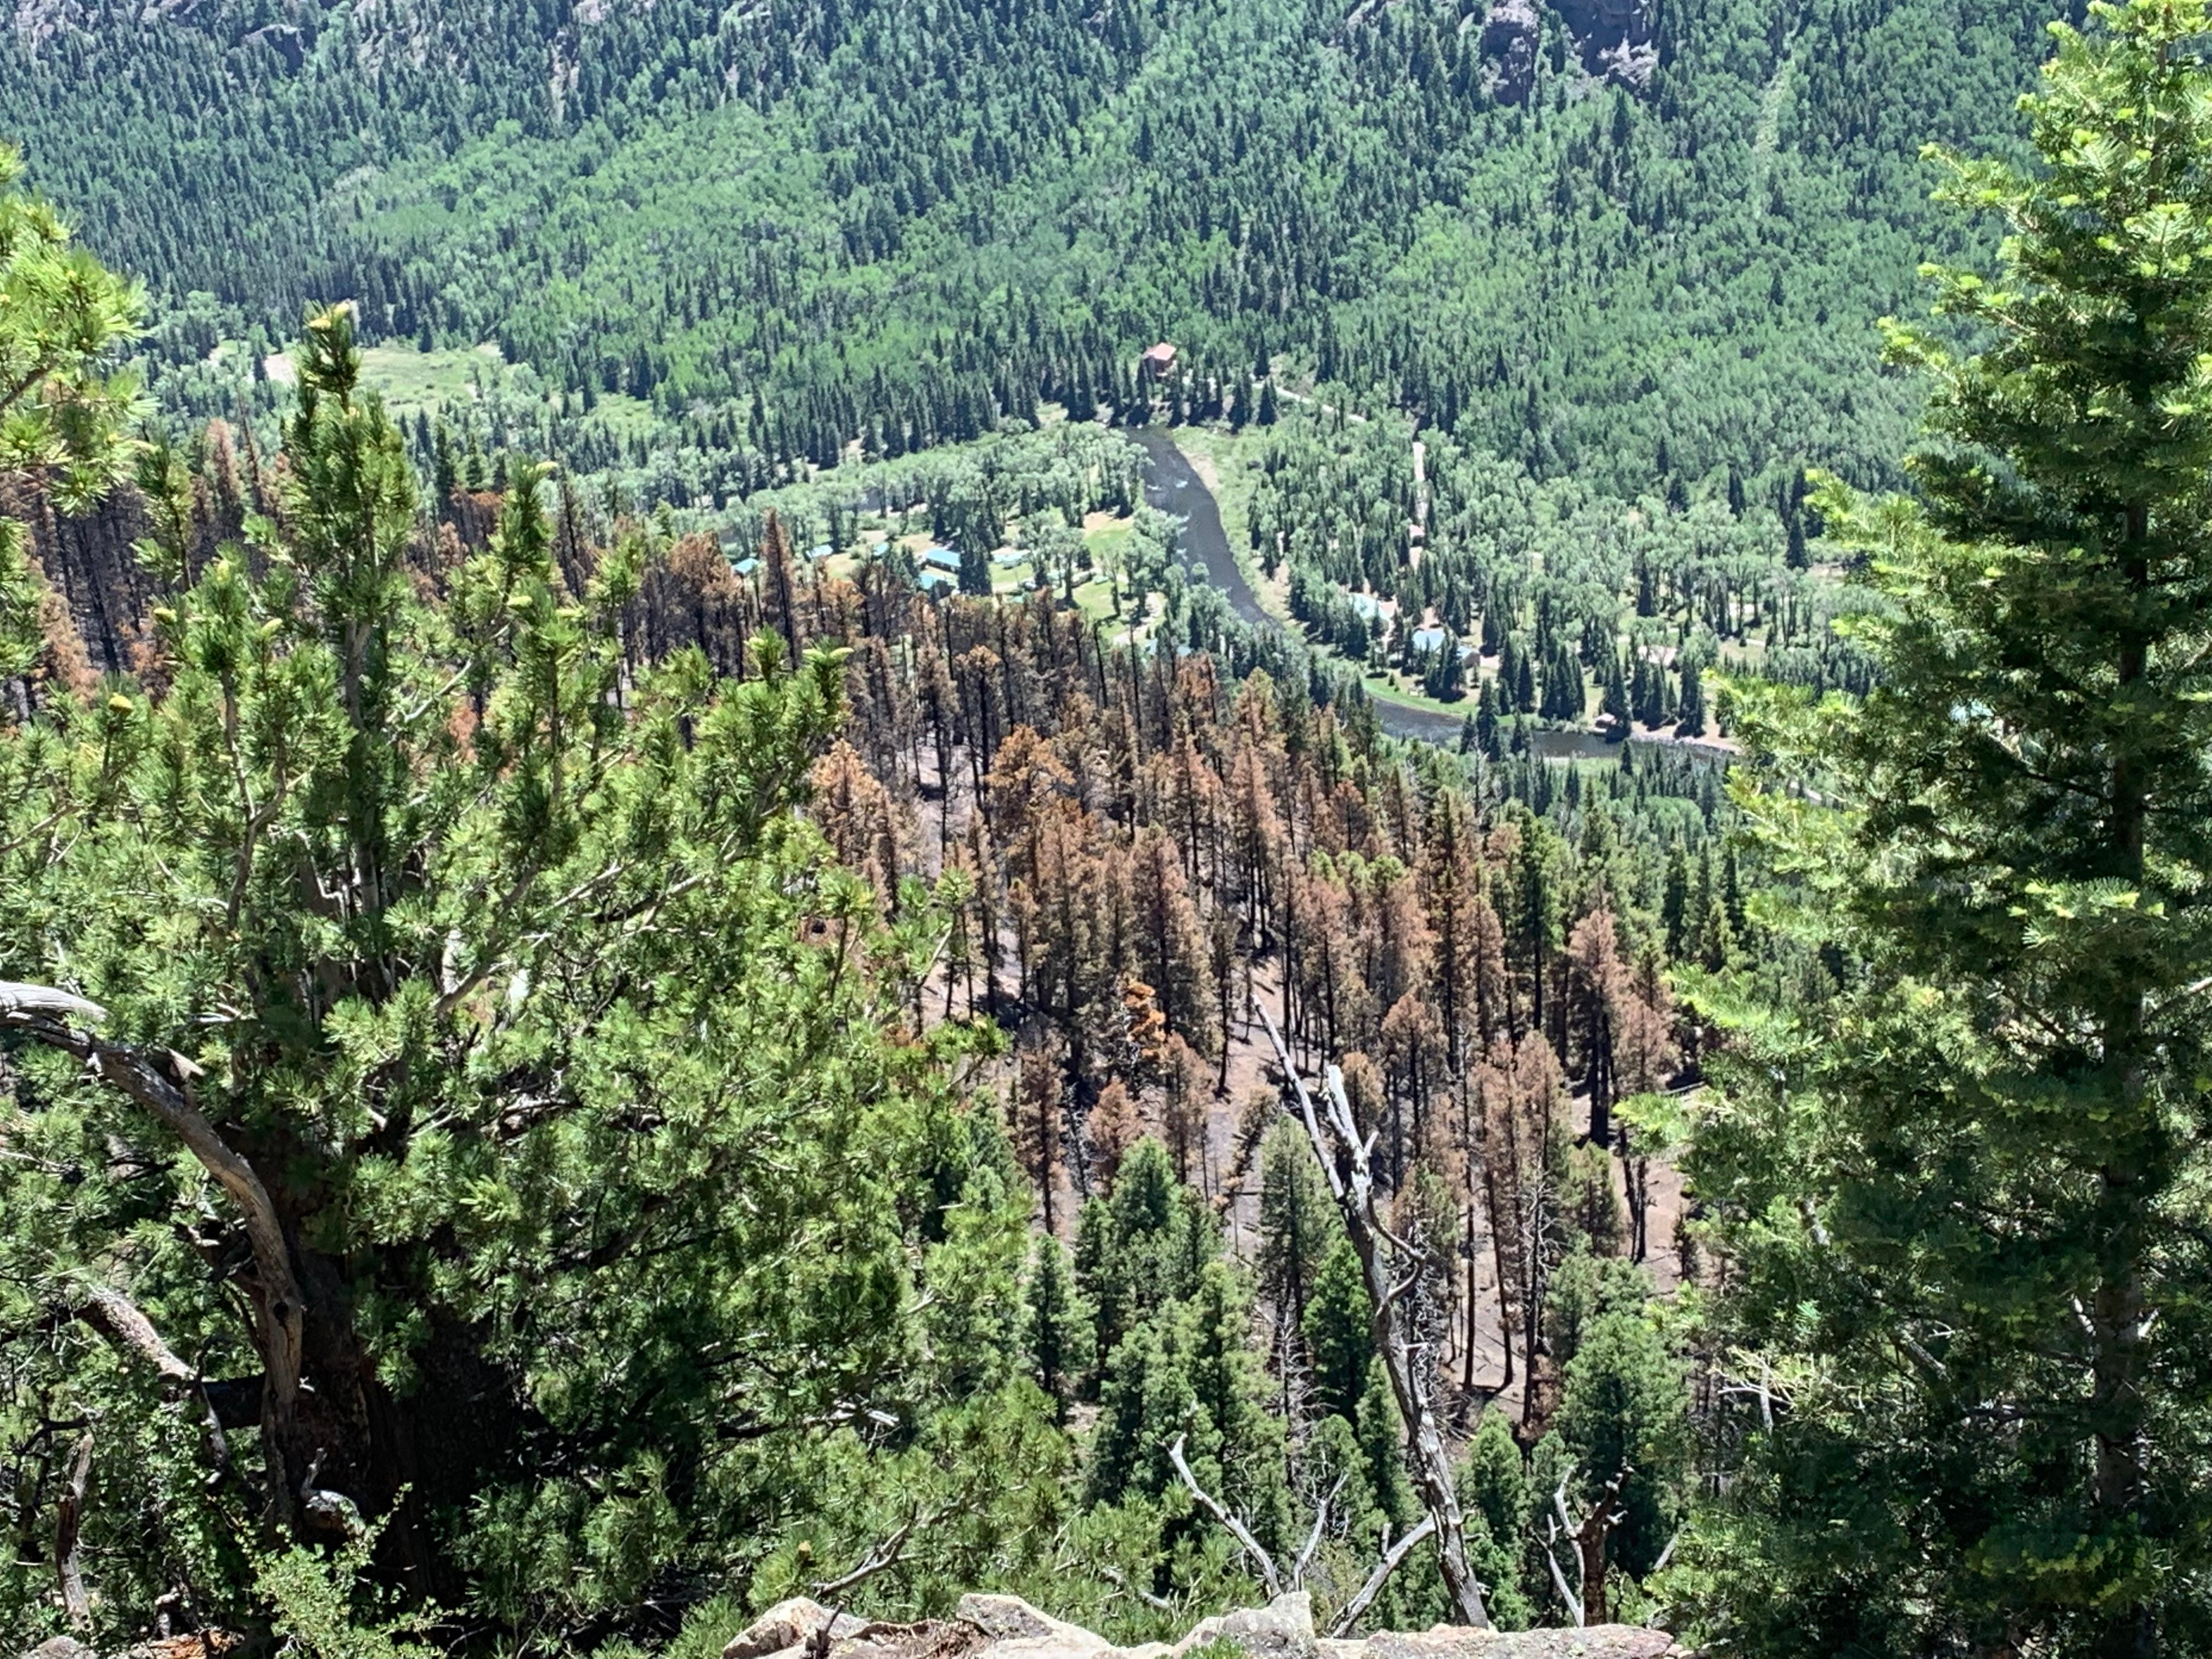 Looking down on the burned portion of the steep slow there are scorched trees. The river and some structures are seen in the valley bottom.